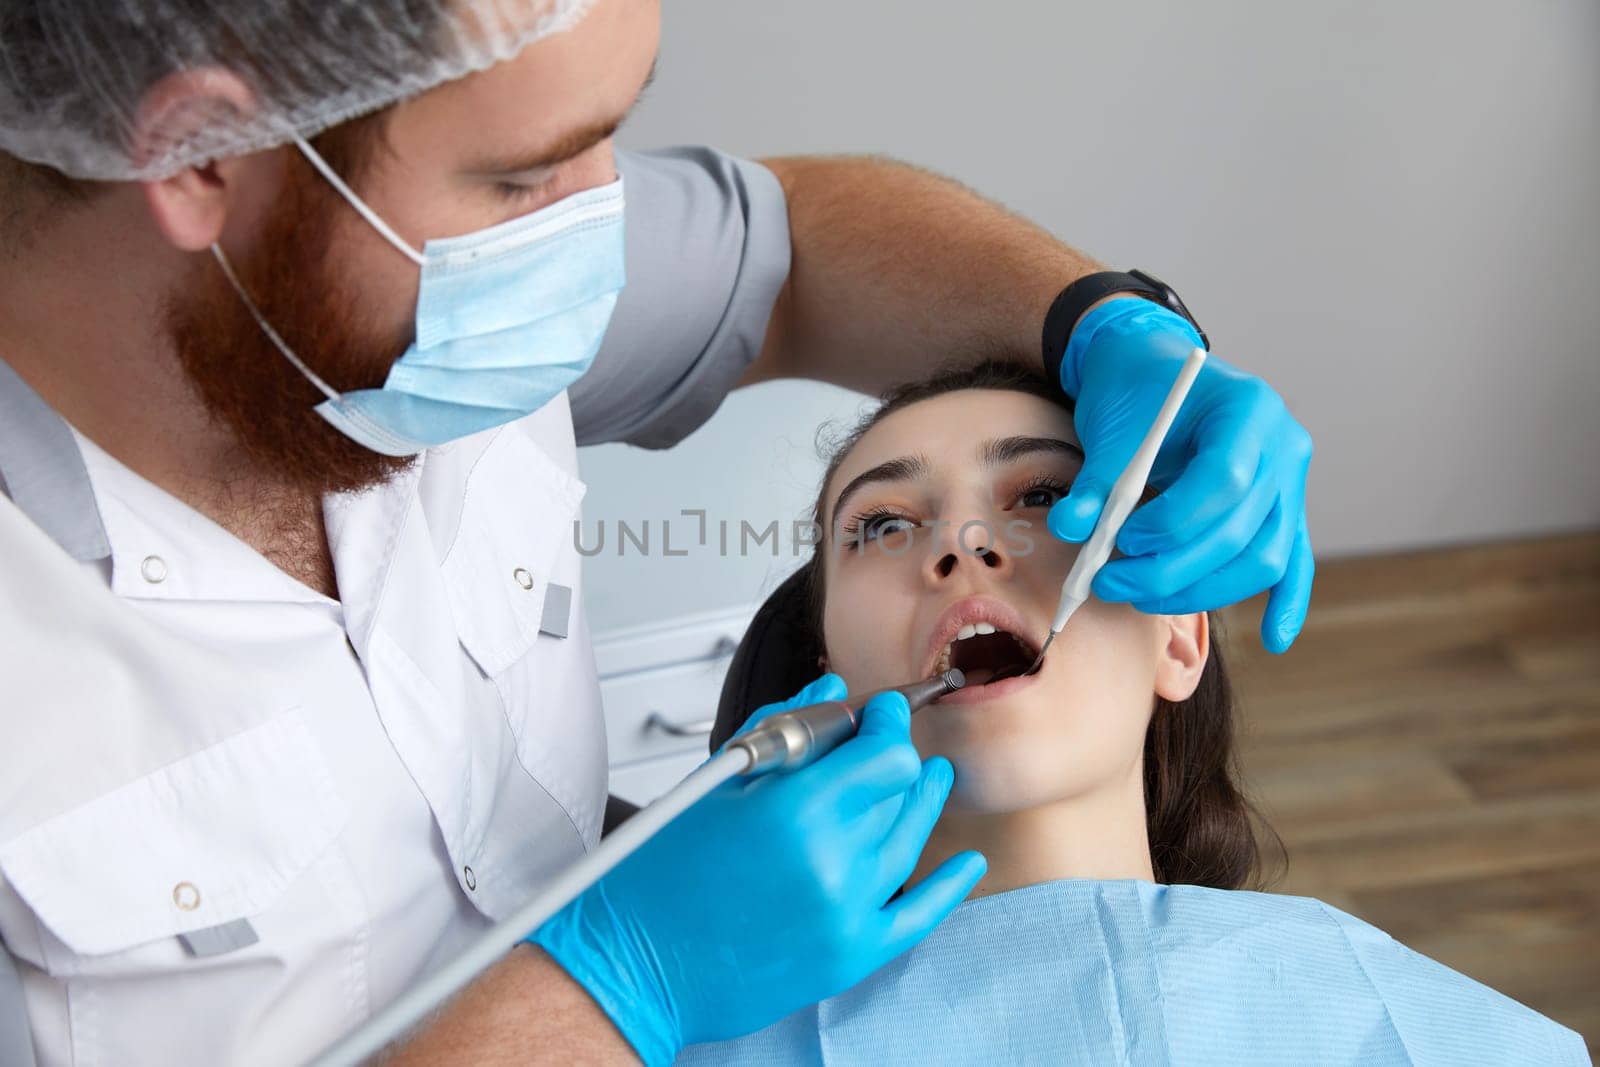 Dentist drilling tooth of female patient in dental chair by Mariakray